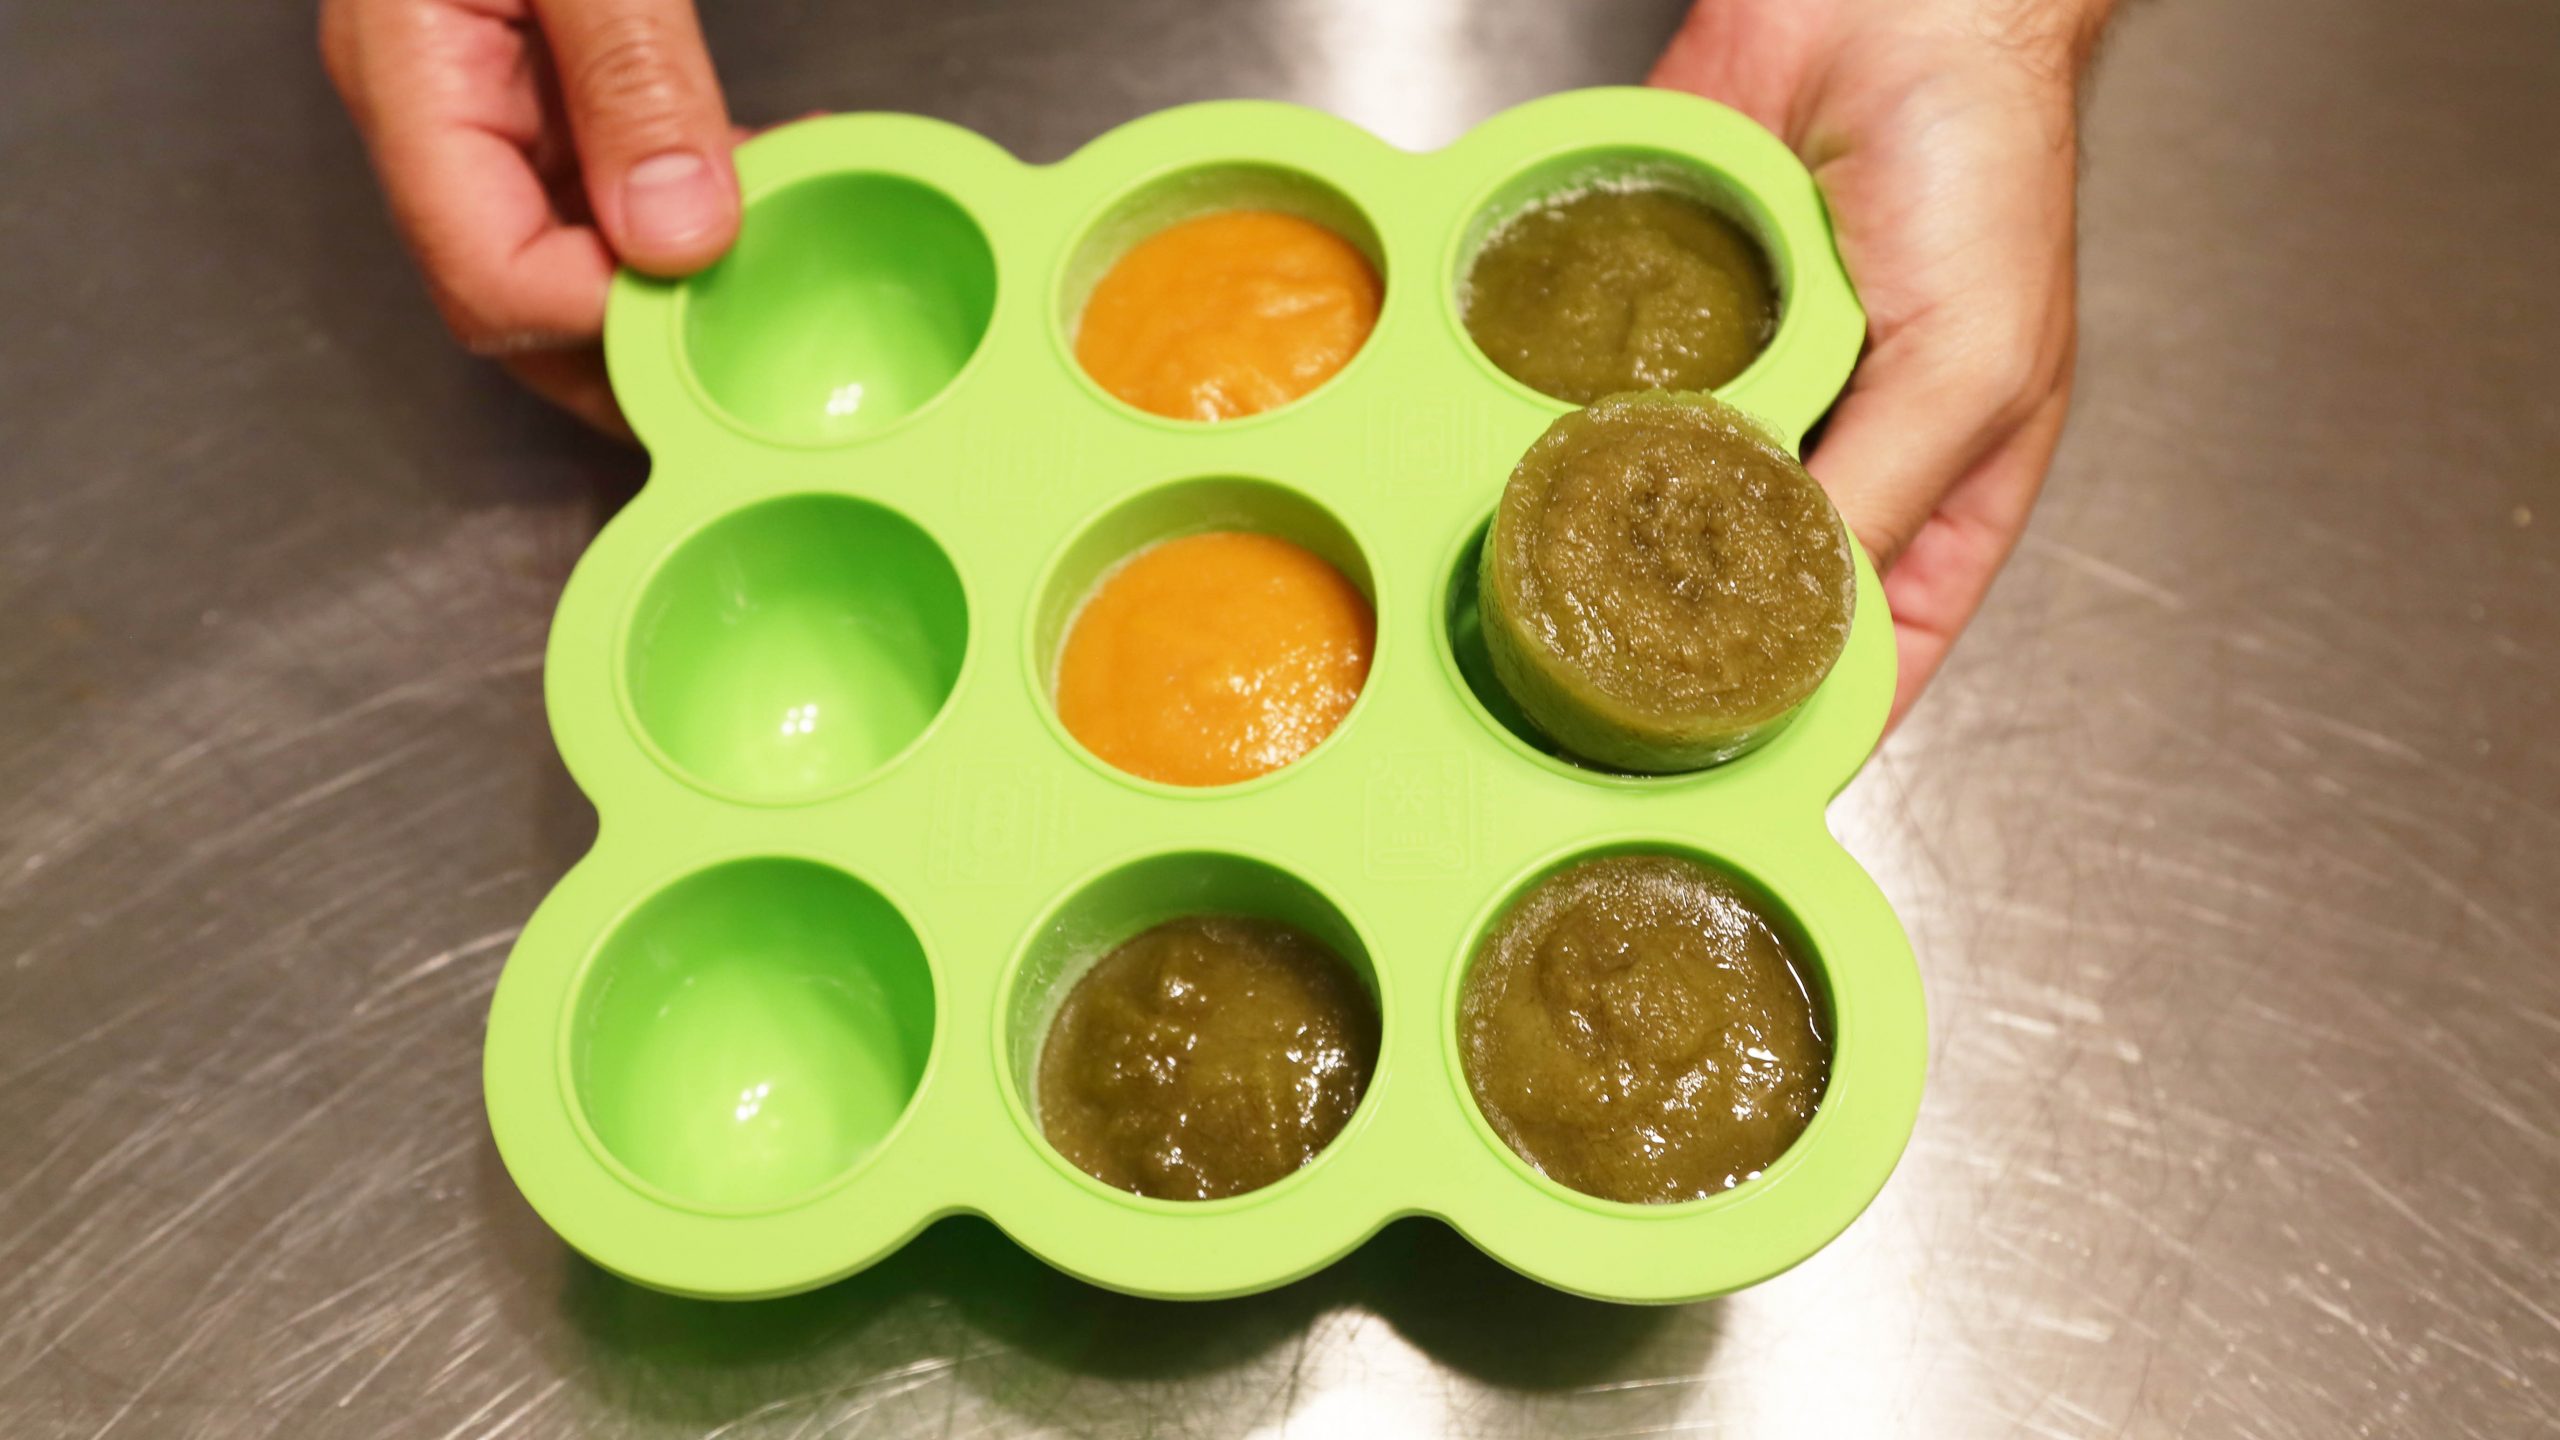 https://www.dontwasteyourmoney.com/wp-content/uploads/2020/06/baby-food-freezer-containers-kiddo-feedo-silicone-storage-container-and-freezer-tray-frozen-review-ub-1-scaled.jpg